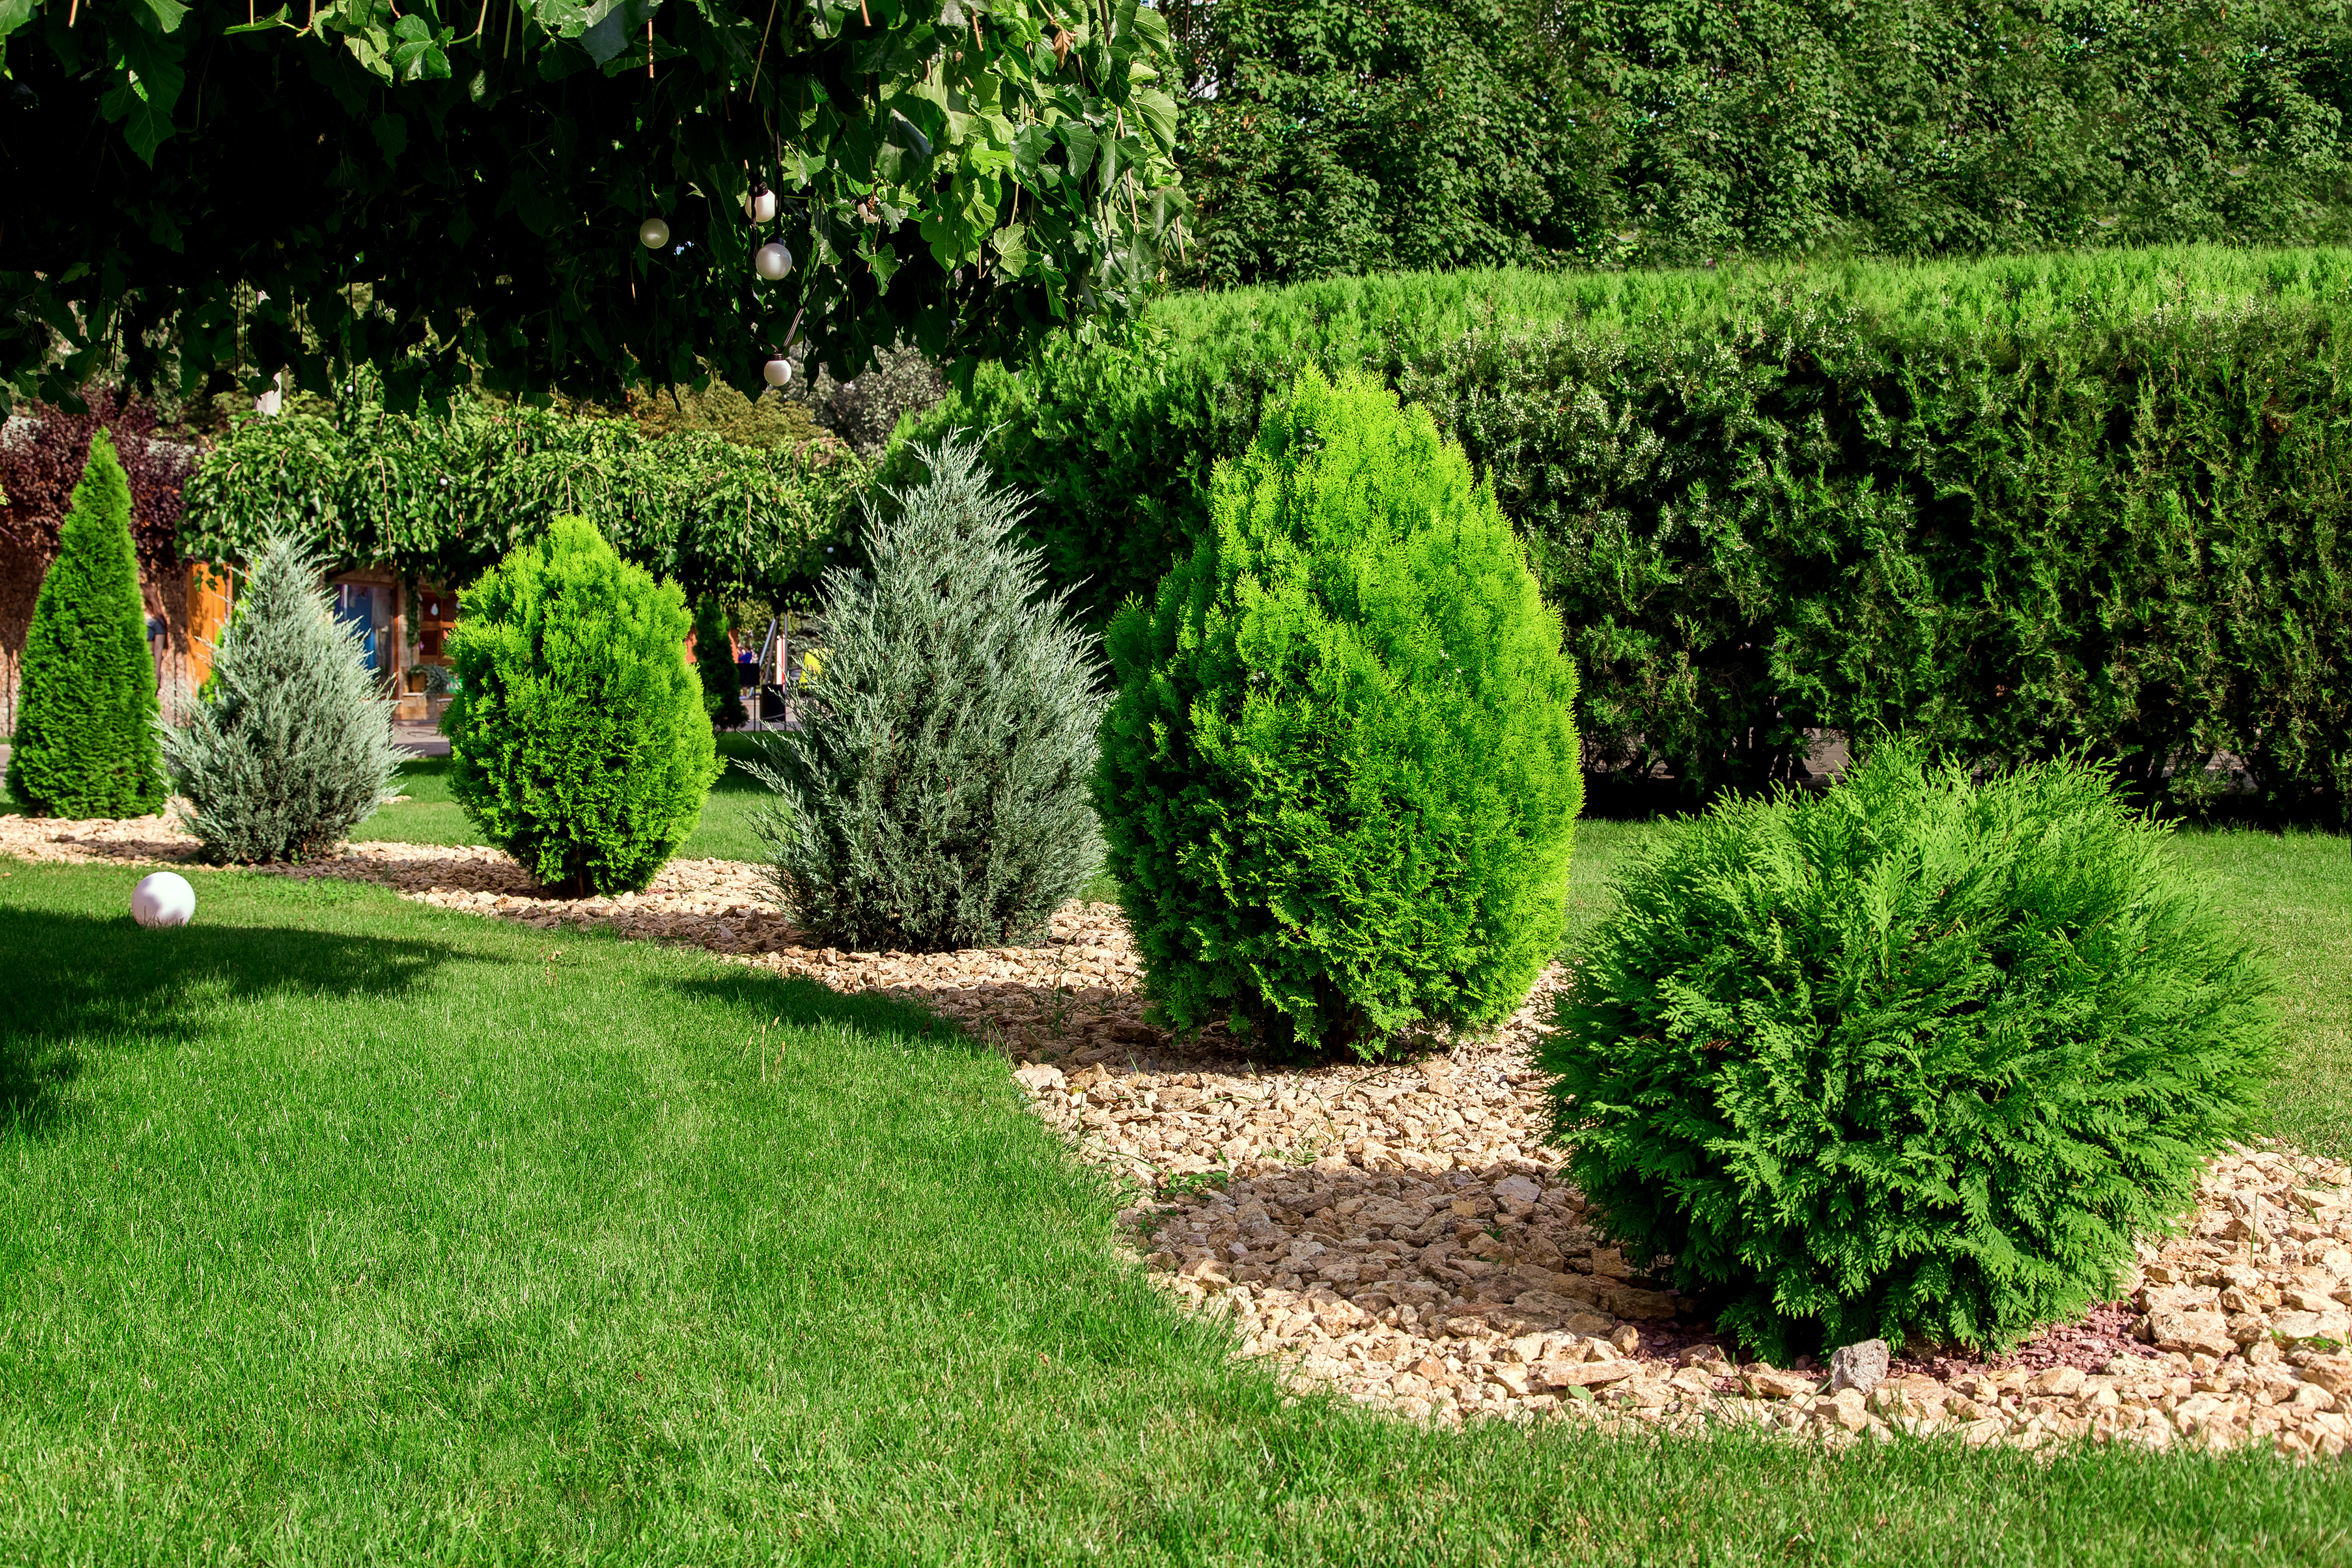 How to Use Decorative Aggregates in your Garden